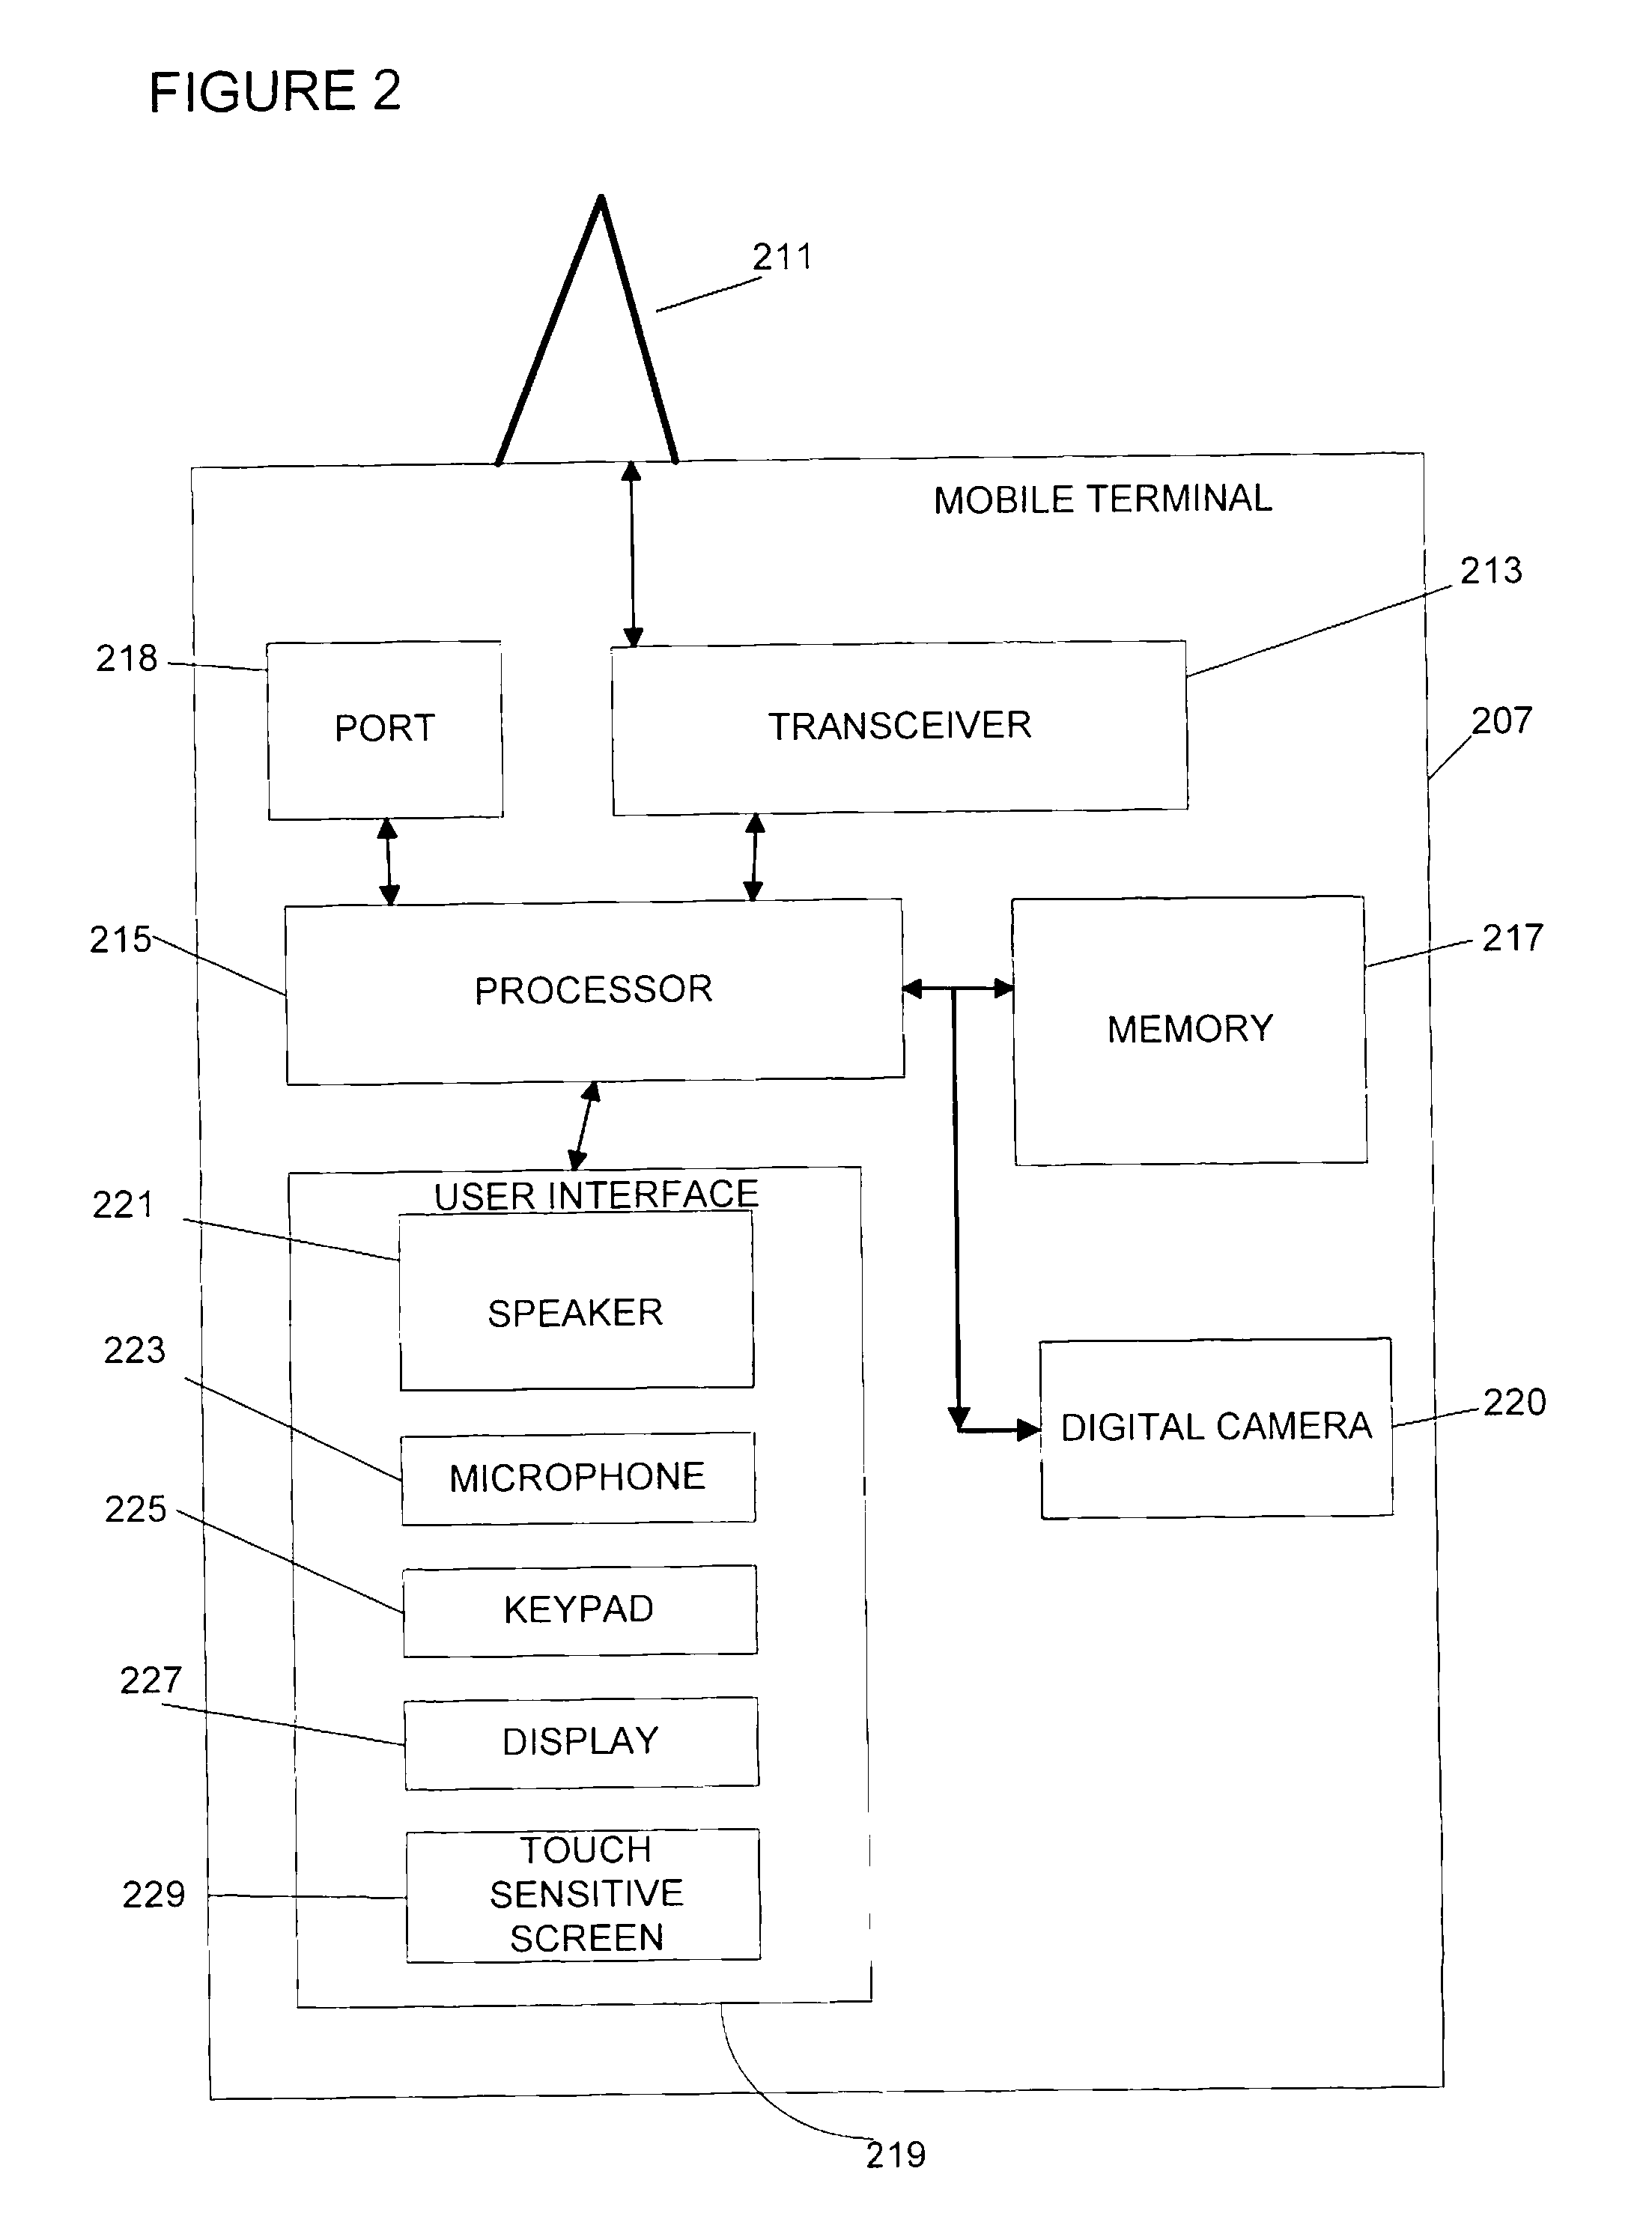 Methods of processing digital image and/or video data including luminance filtering based on chrominance data and related systems and computer program products